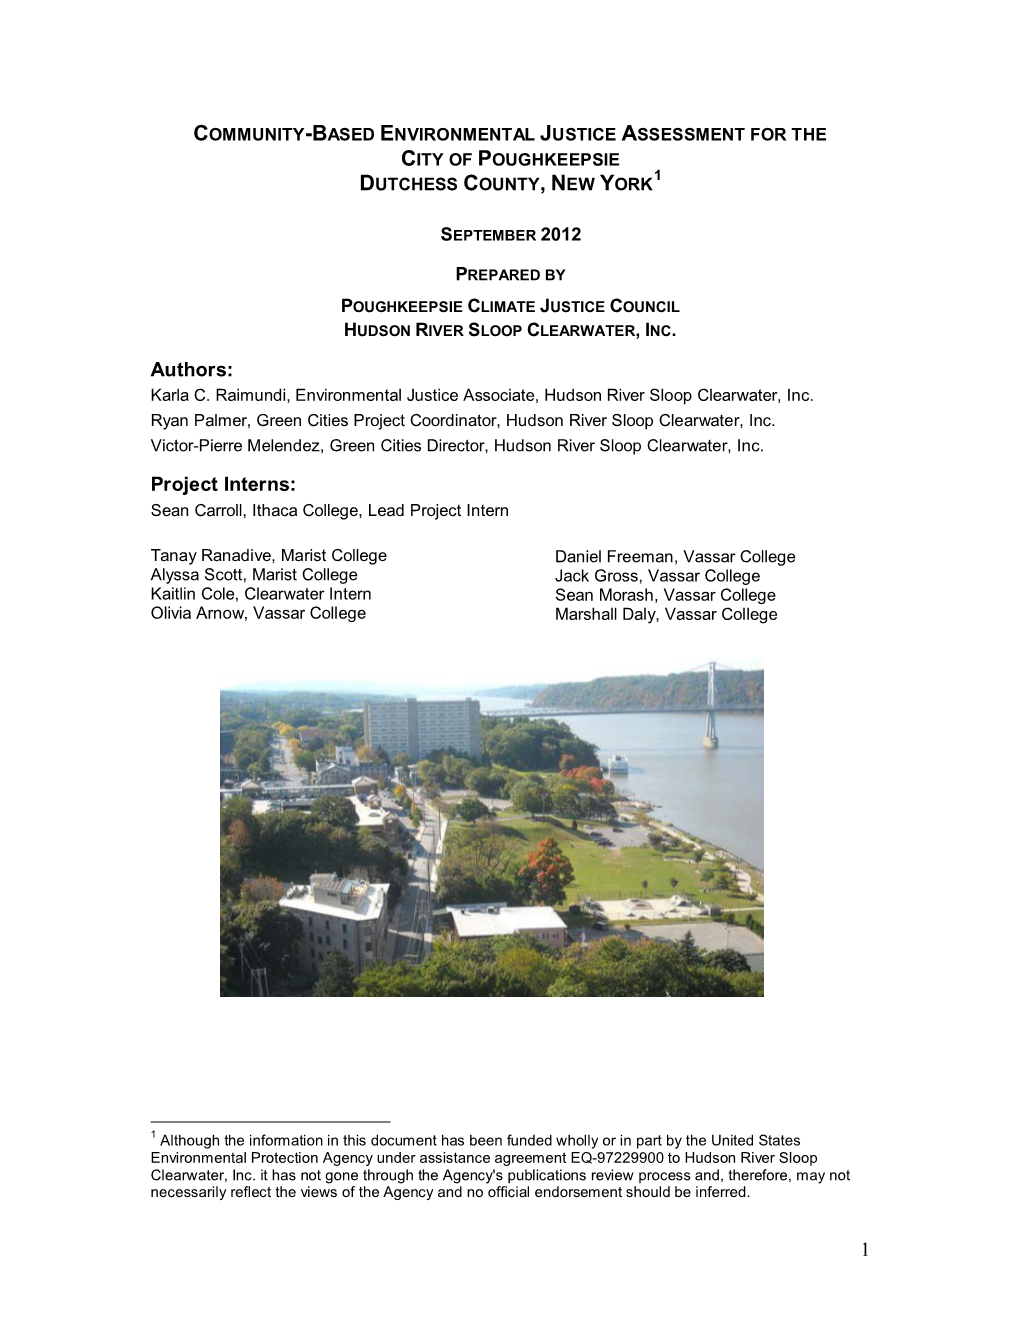 Community-Based Climate Justice Assessment; City of Poughkeepsie, Dutchess Co., NY